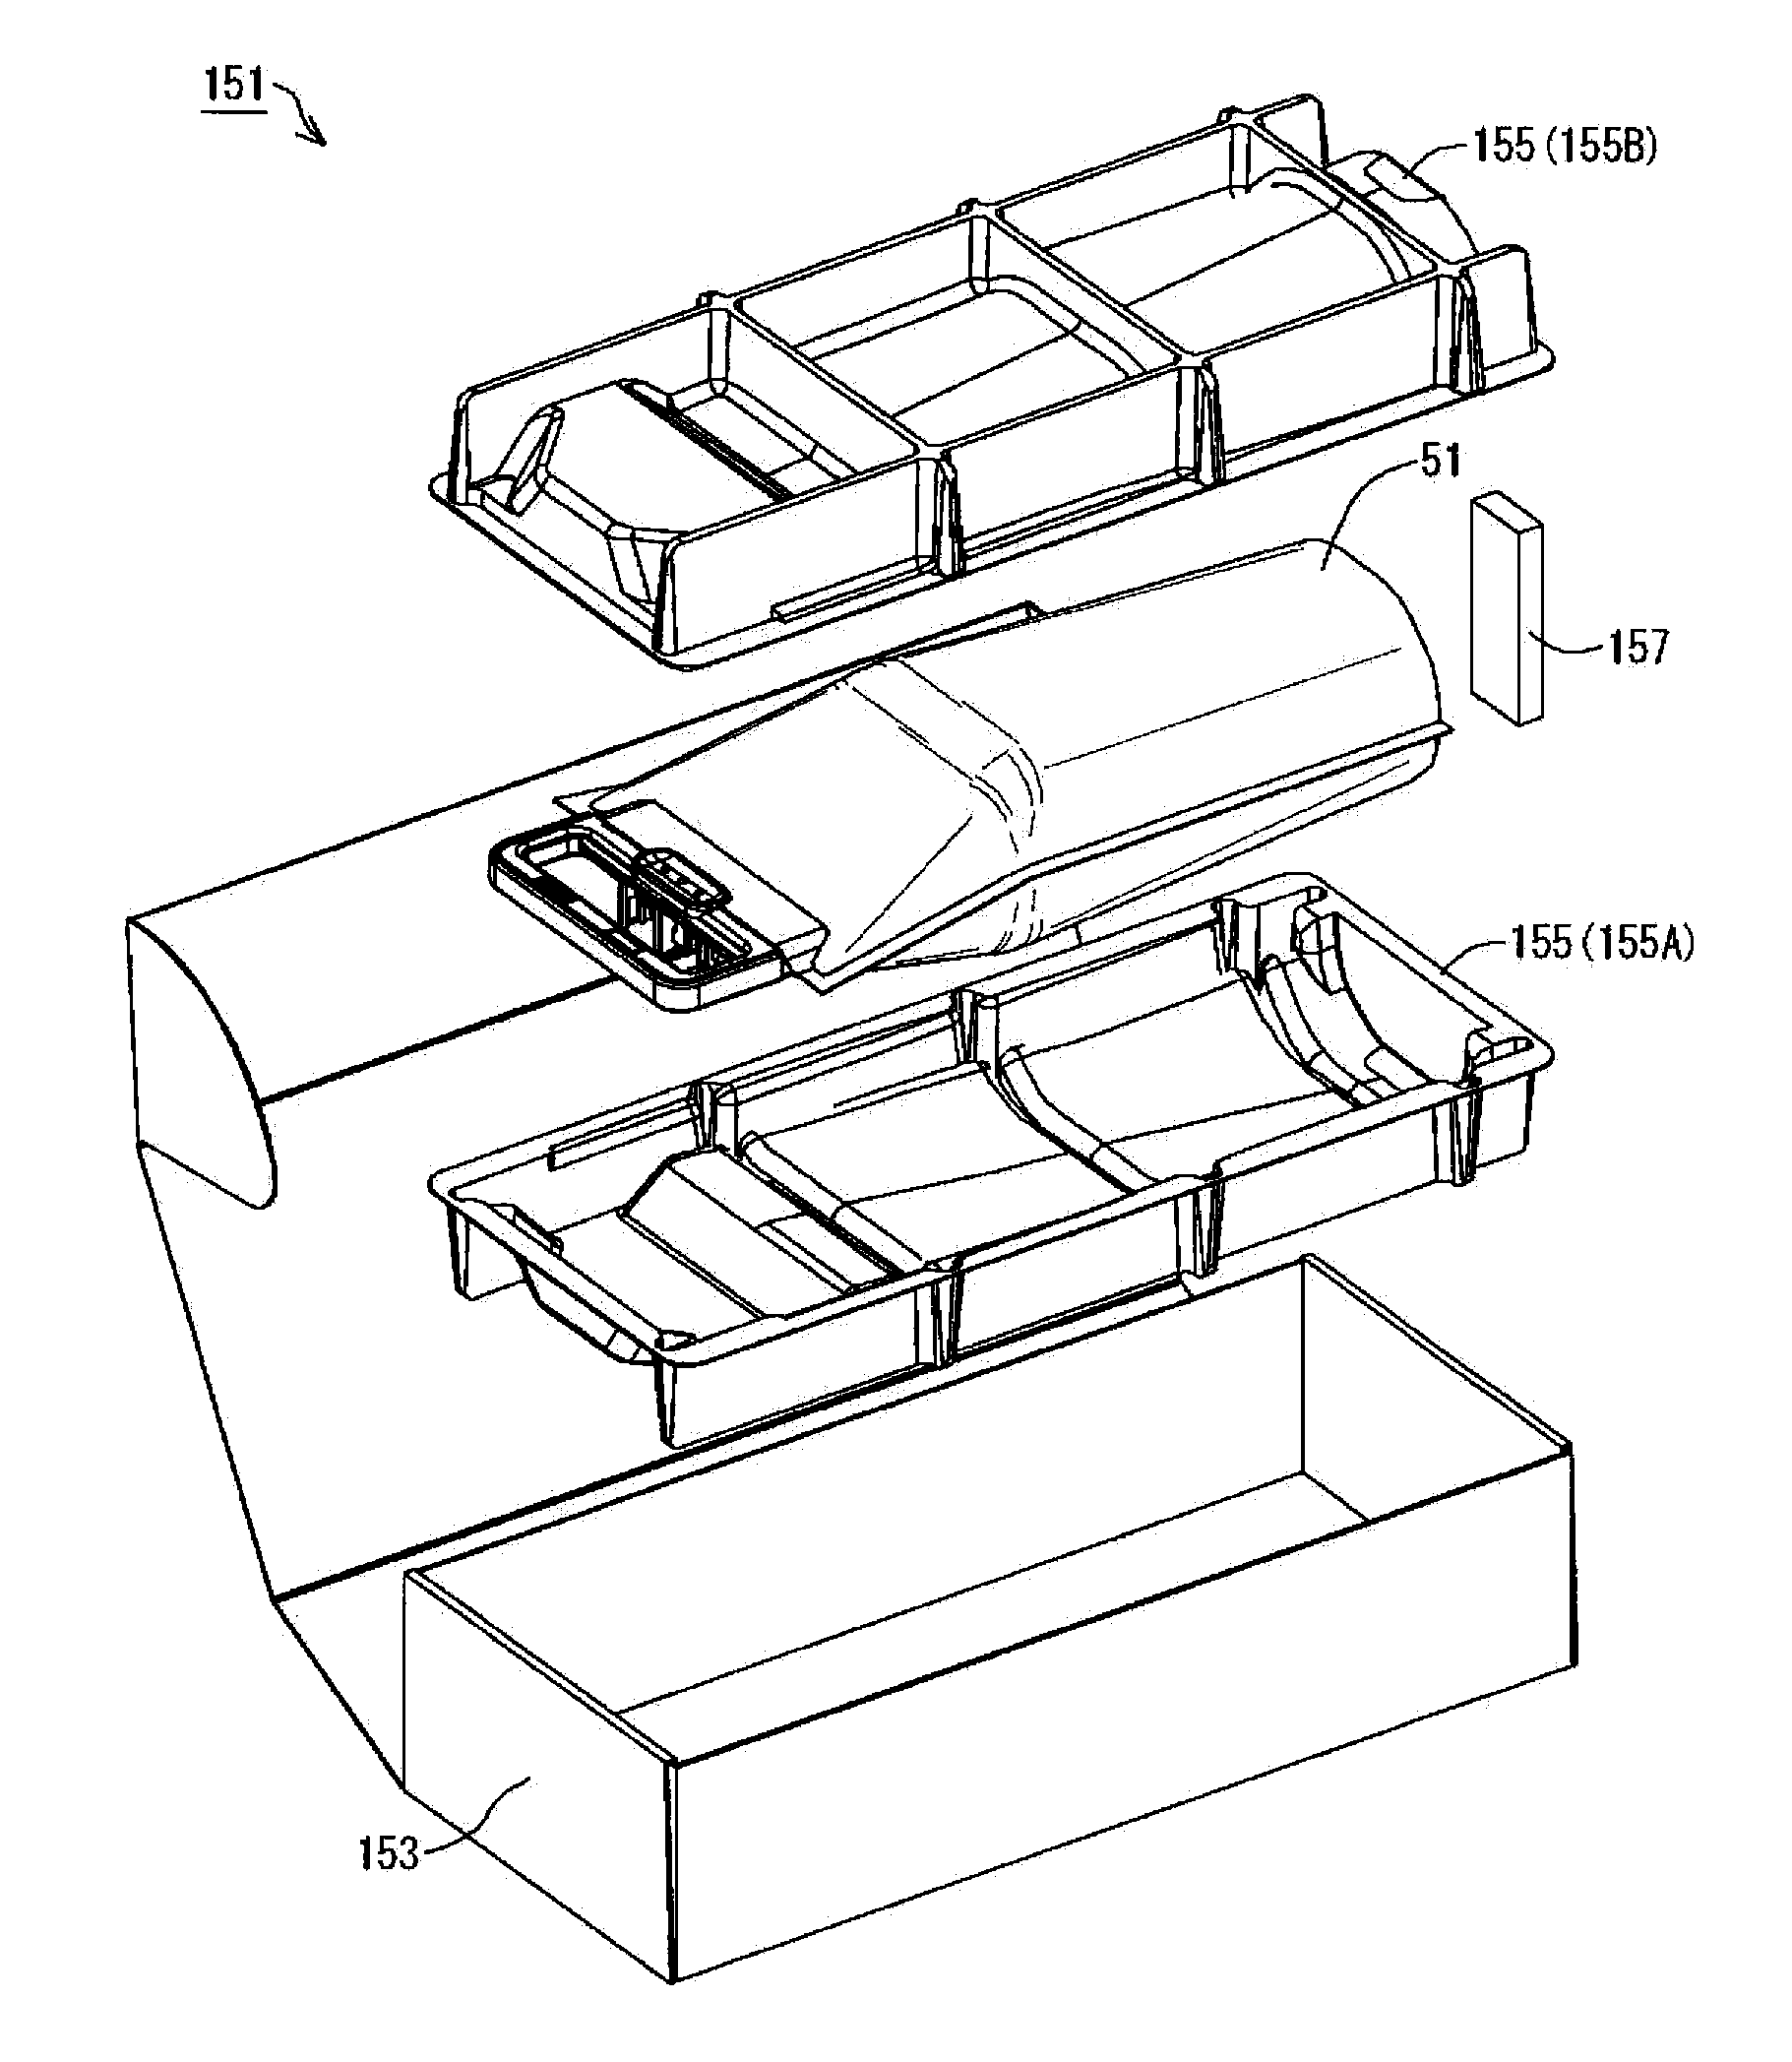 Packaging tray and packaging body